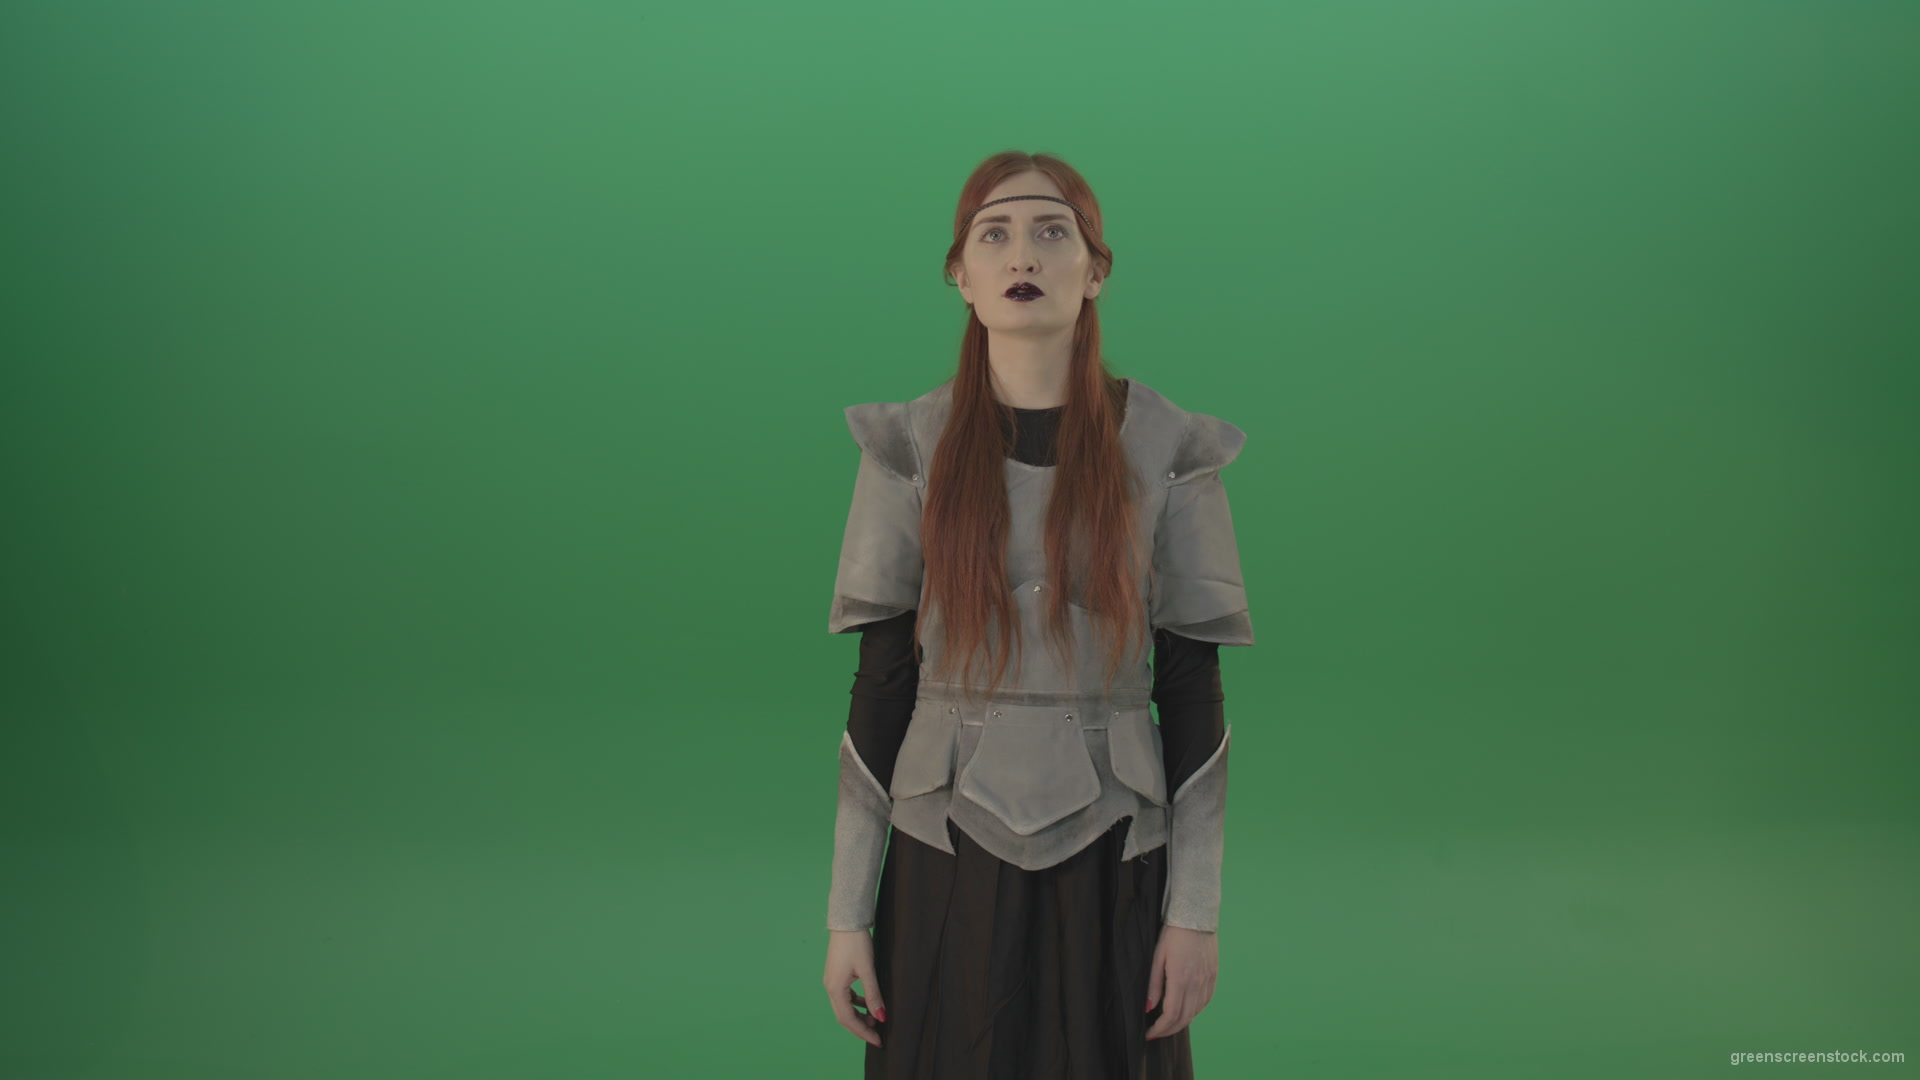 Actress-red-hair-girl-in-a-medieval-war-dress-crosses-praying-to-God-on-green-screen_009 Green Screen Stock